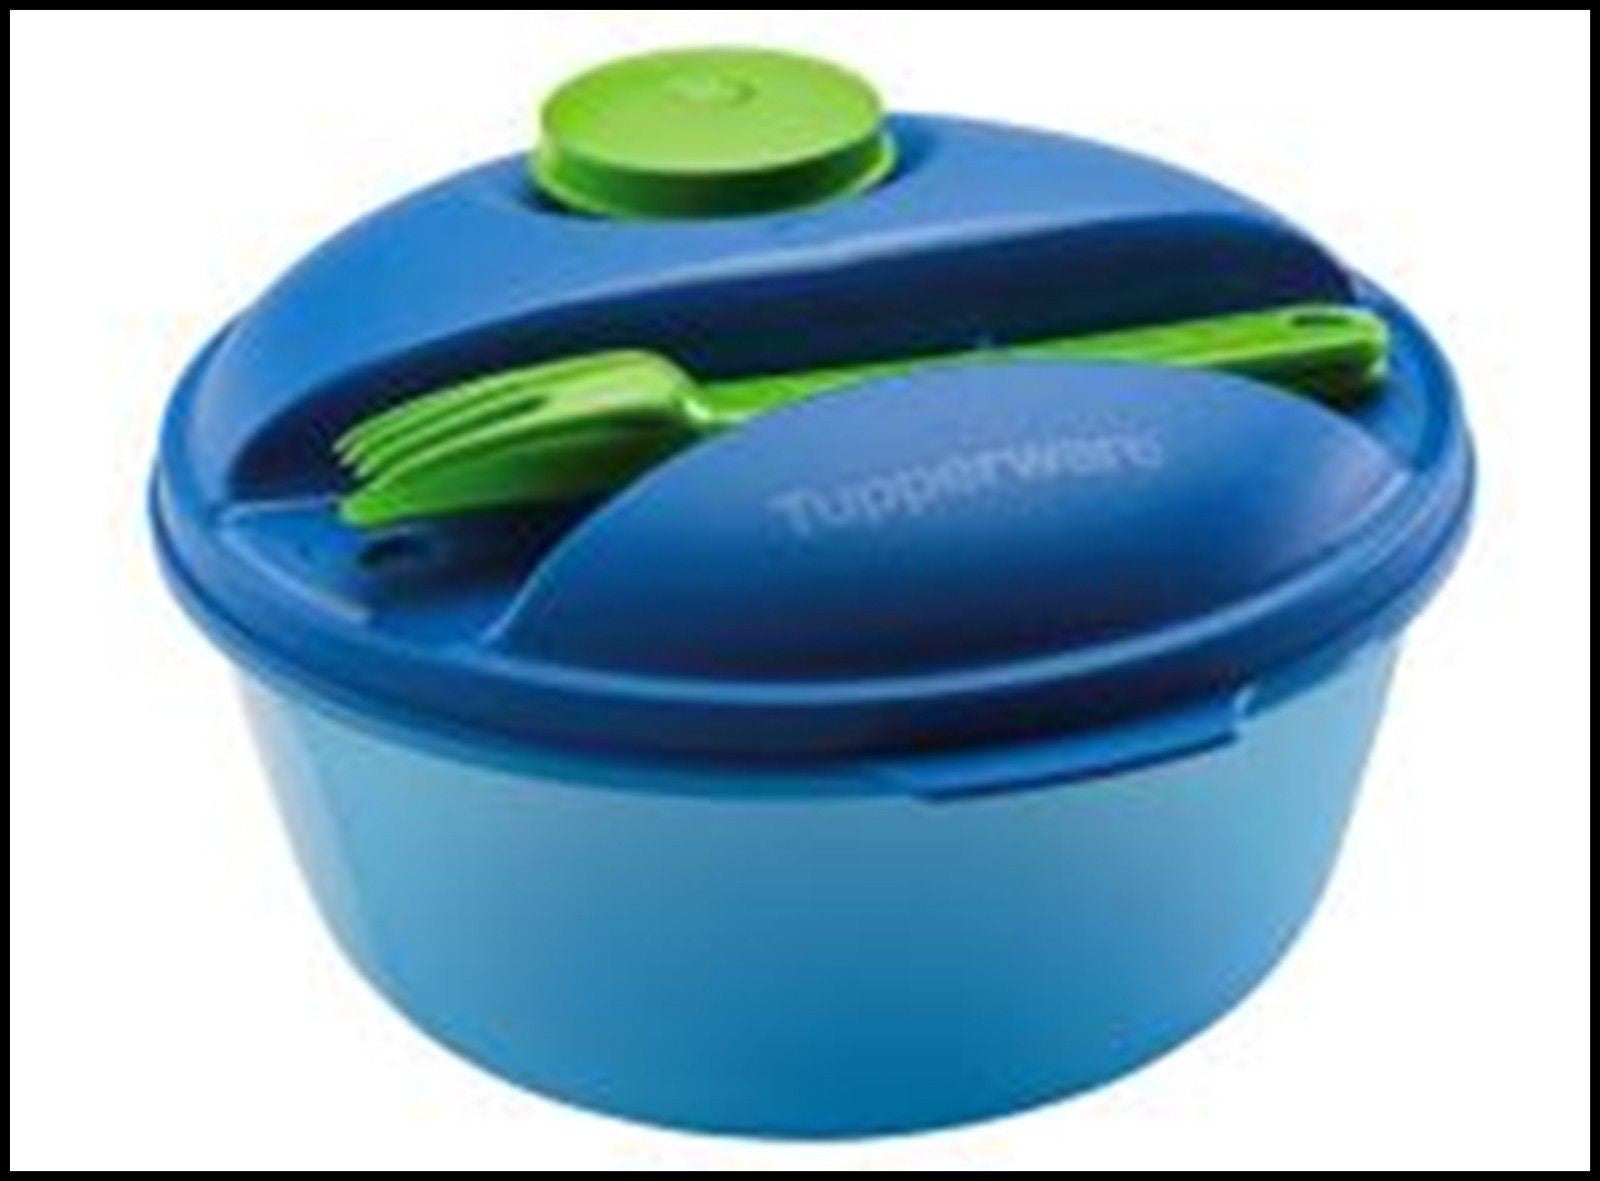 Hot Food On-the-Go (1,5L)  cutlery, comfort food, Tupperware